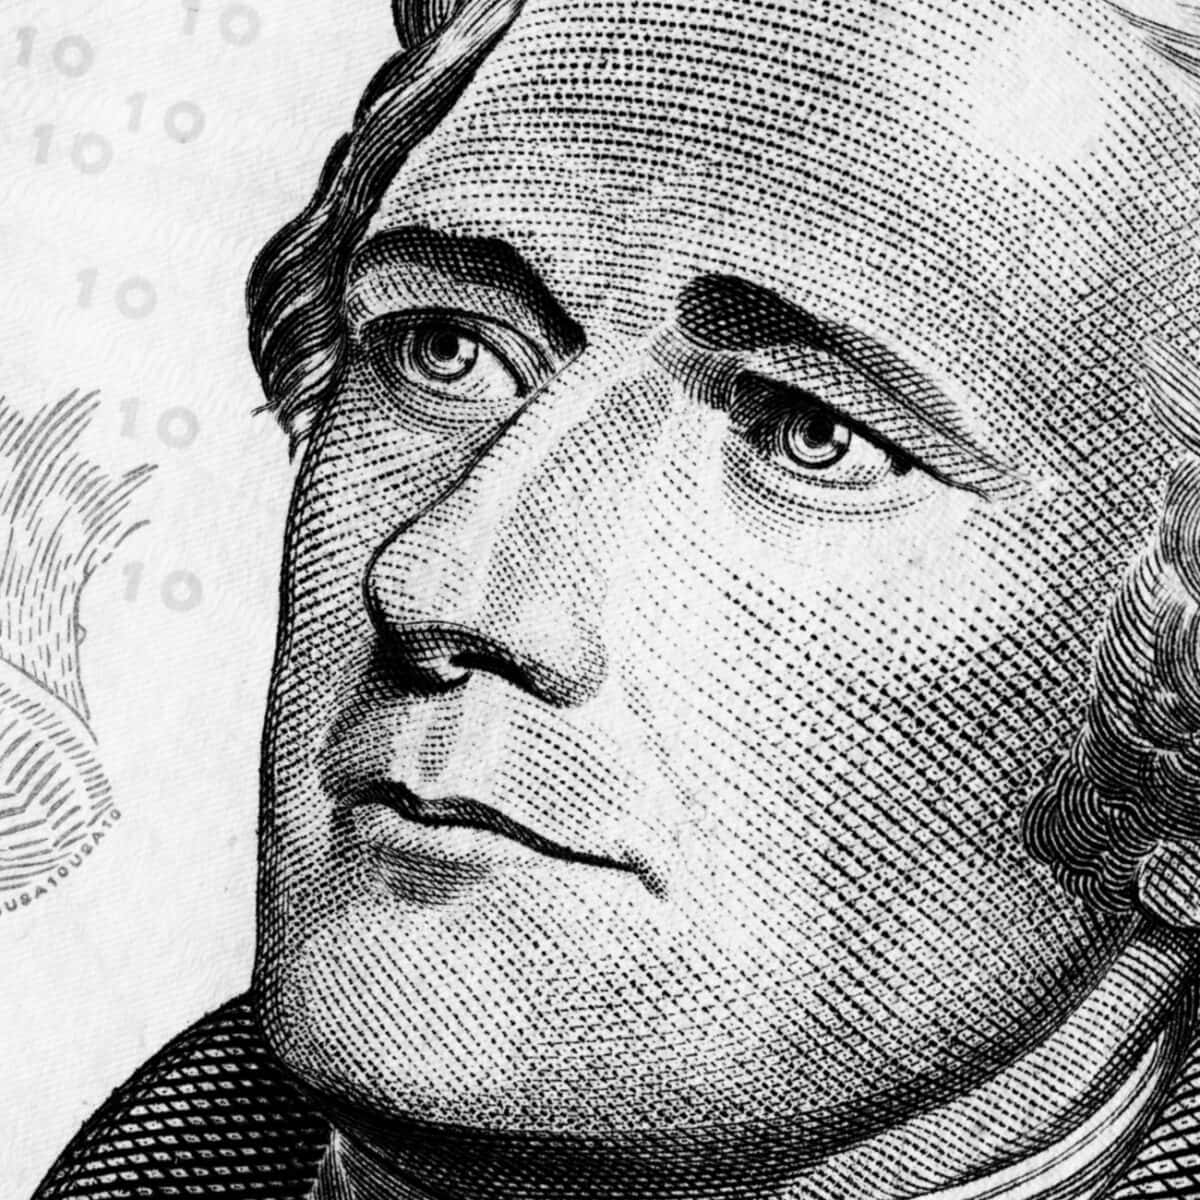 A Close Up Of A Portrait Of George Washington On A One Dollar Bill